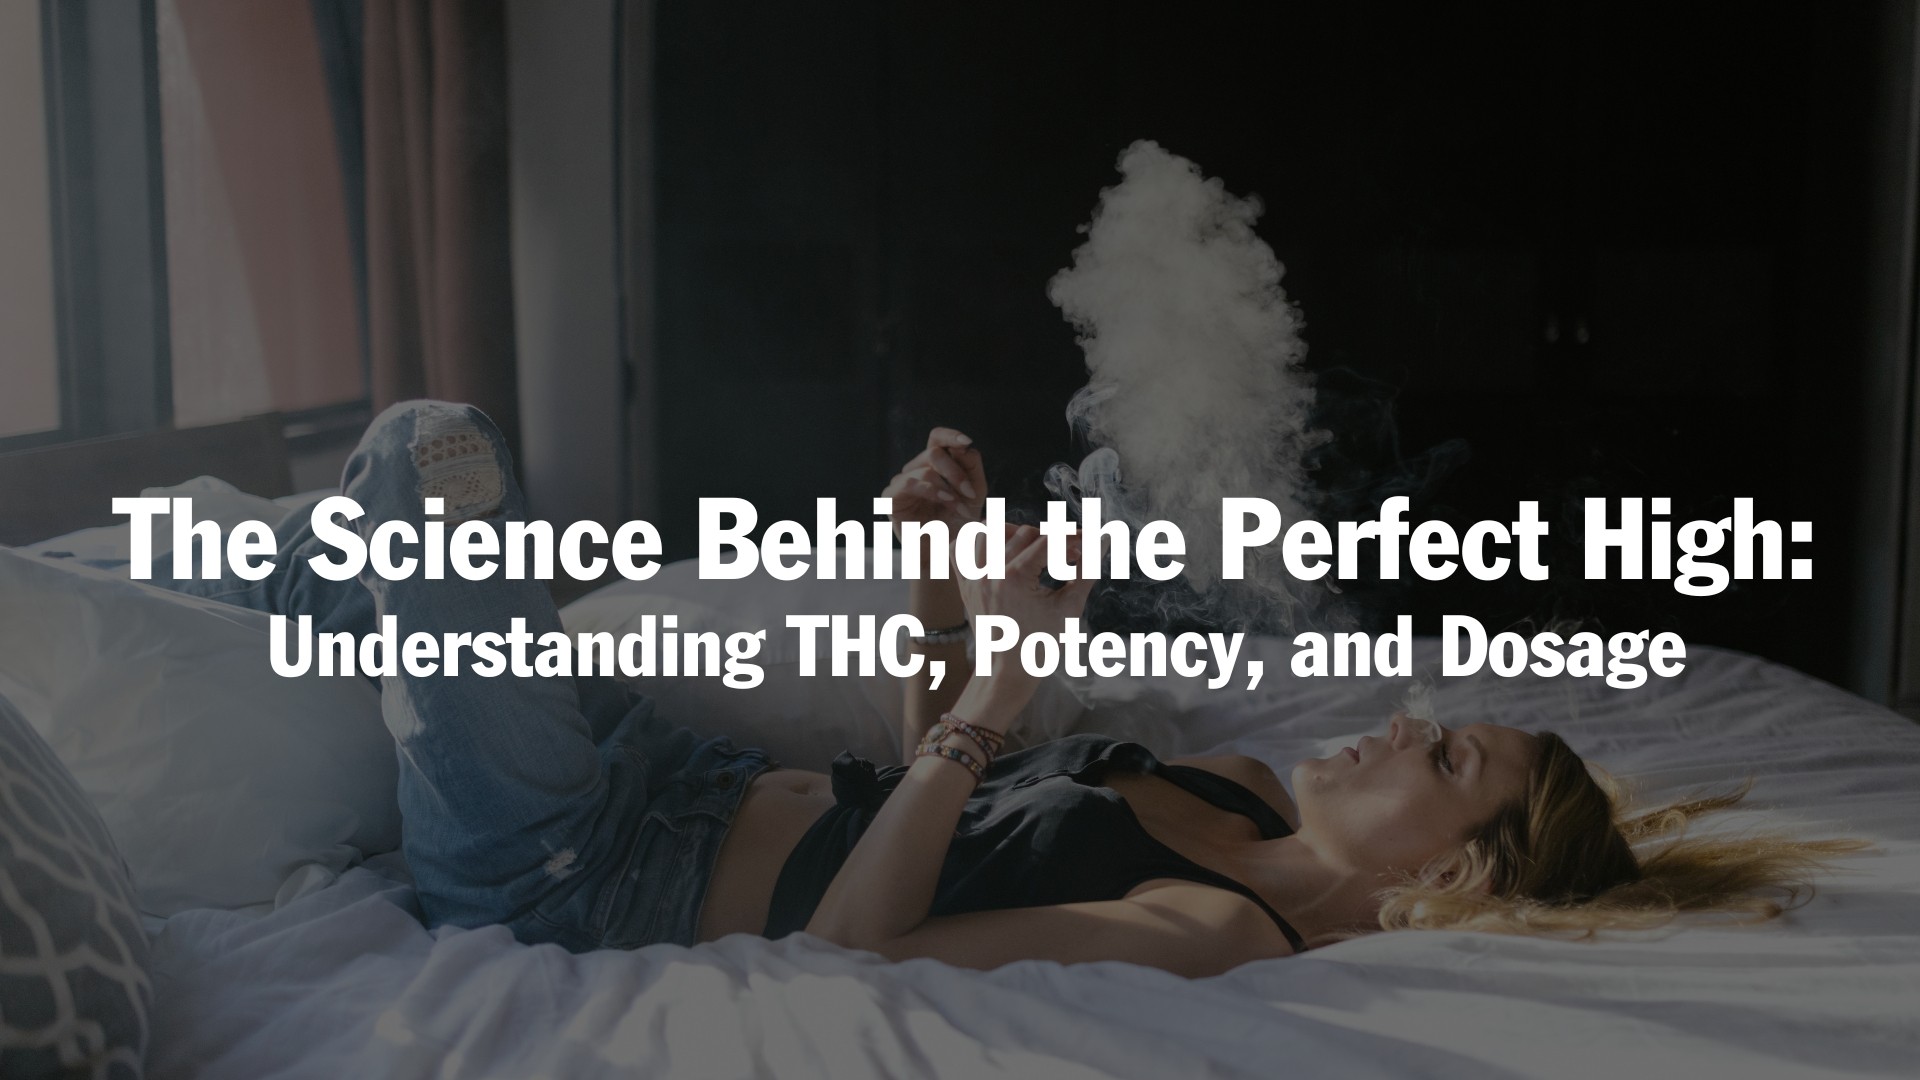 The Science Behind the Perfect High: Understanding THC, Potency, and Dosage